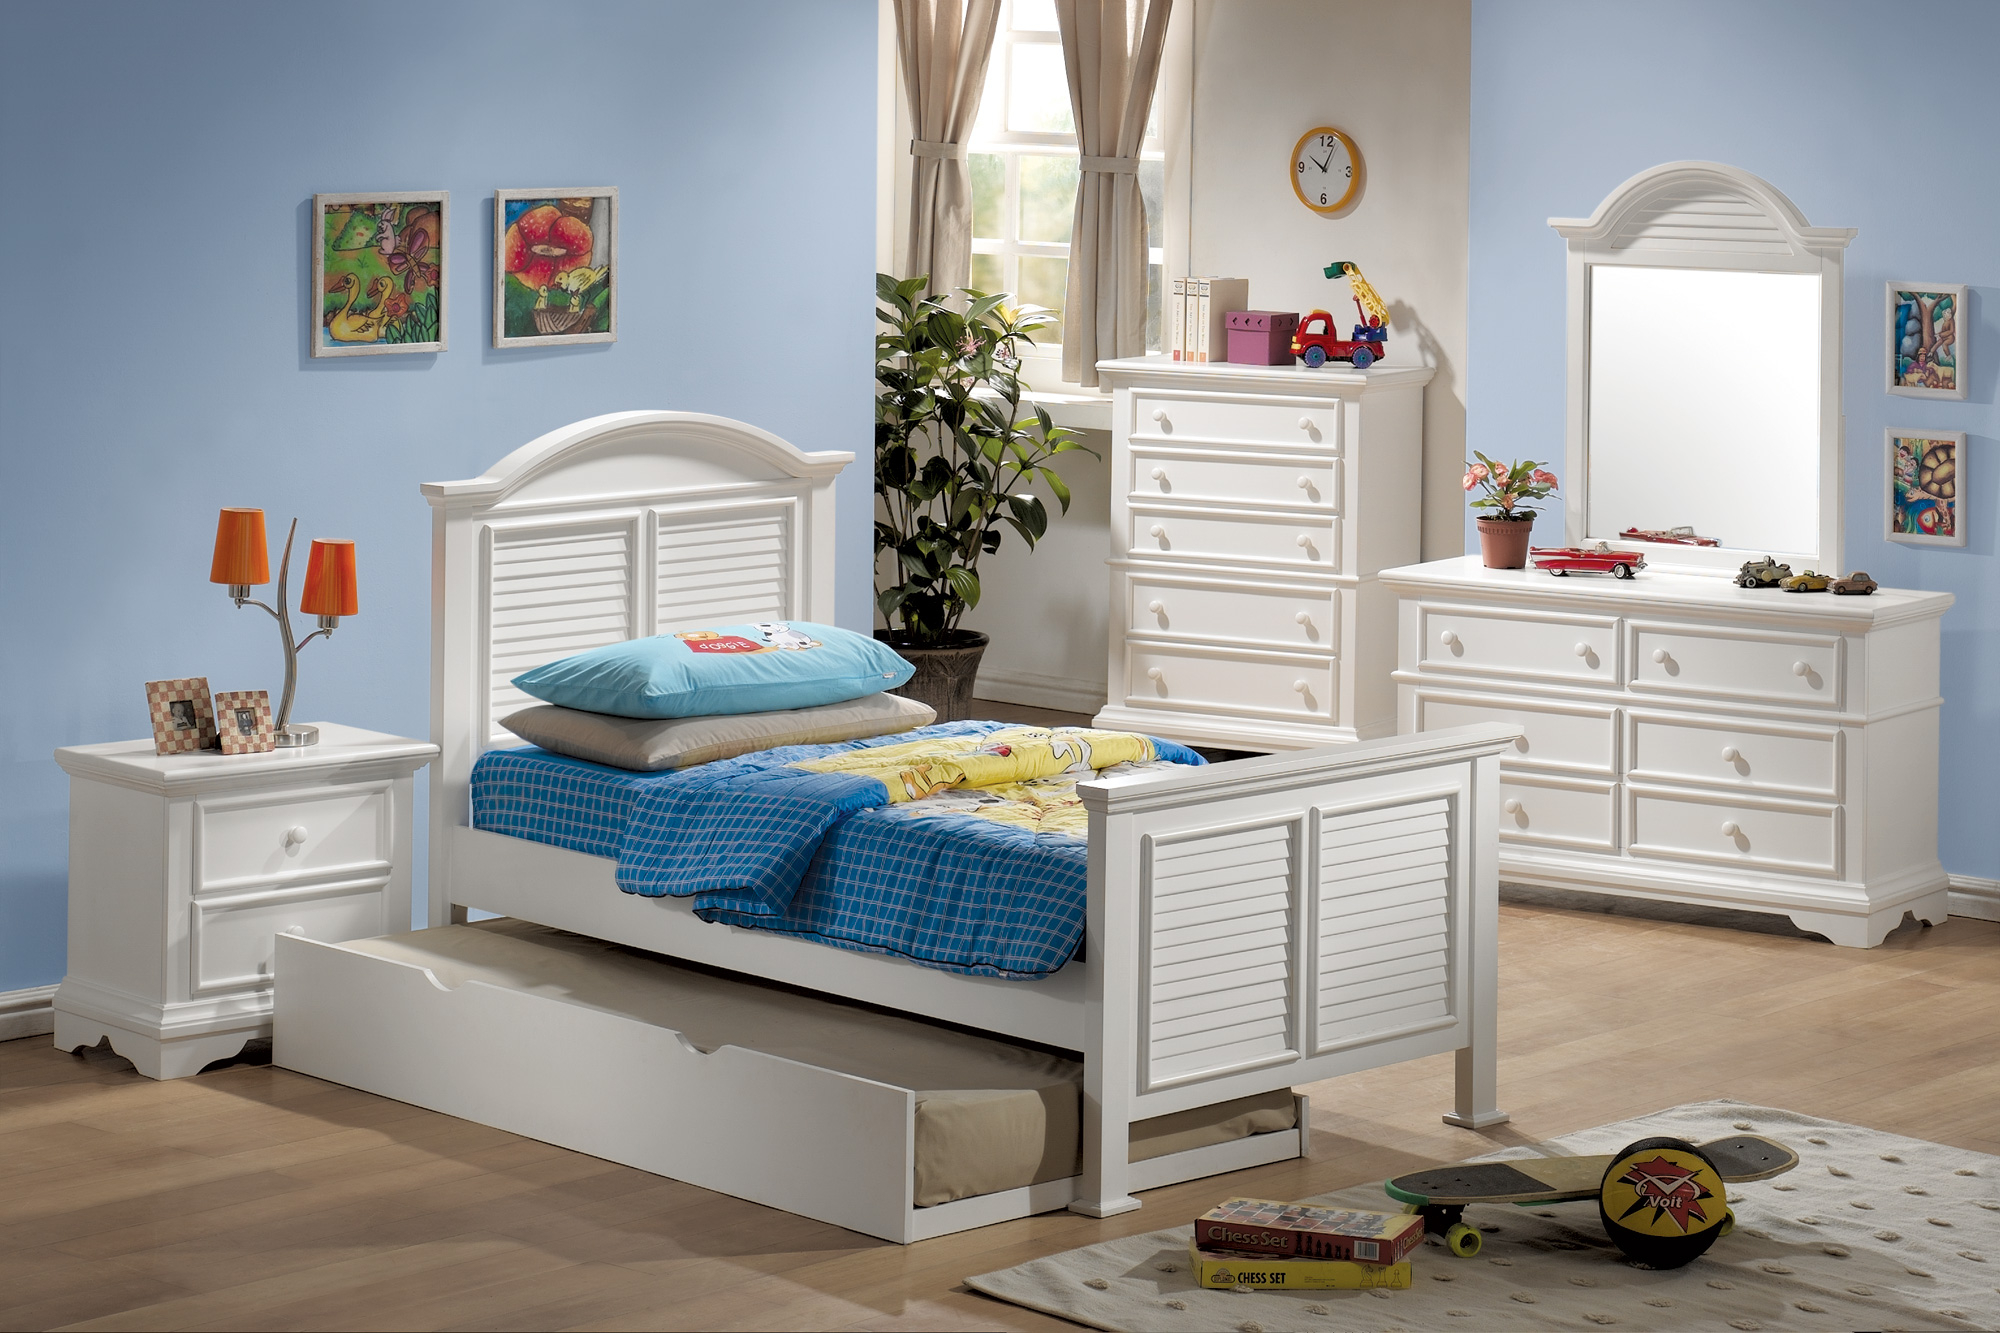 Coaster Furniture Merlin Collection White Bedroom Settwin Bed within proportions 2000 X 1333